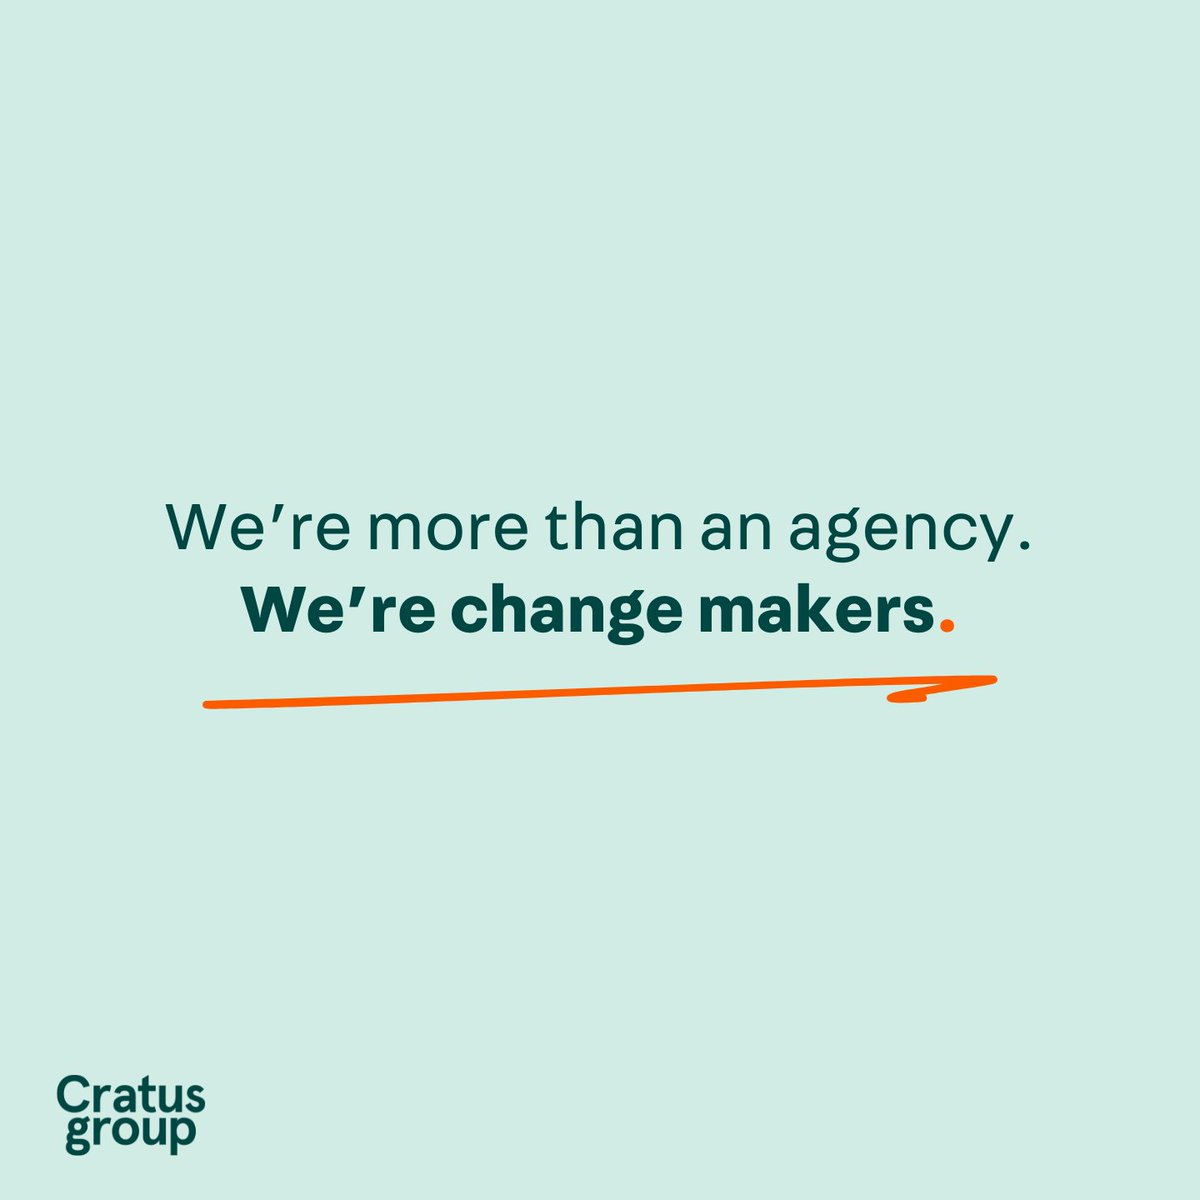 ⭐ Meet our Change Makers ⭐ This week we say hello to Georgina Walker, who is an Account Director in our Advocacy team. 👋 Want to learn more about all our Change Makers? 📚 Head to cratus.co.uk/about-us #wearechangemakers